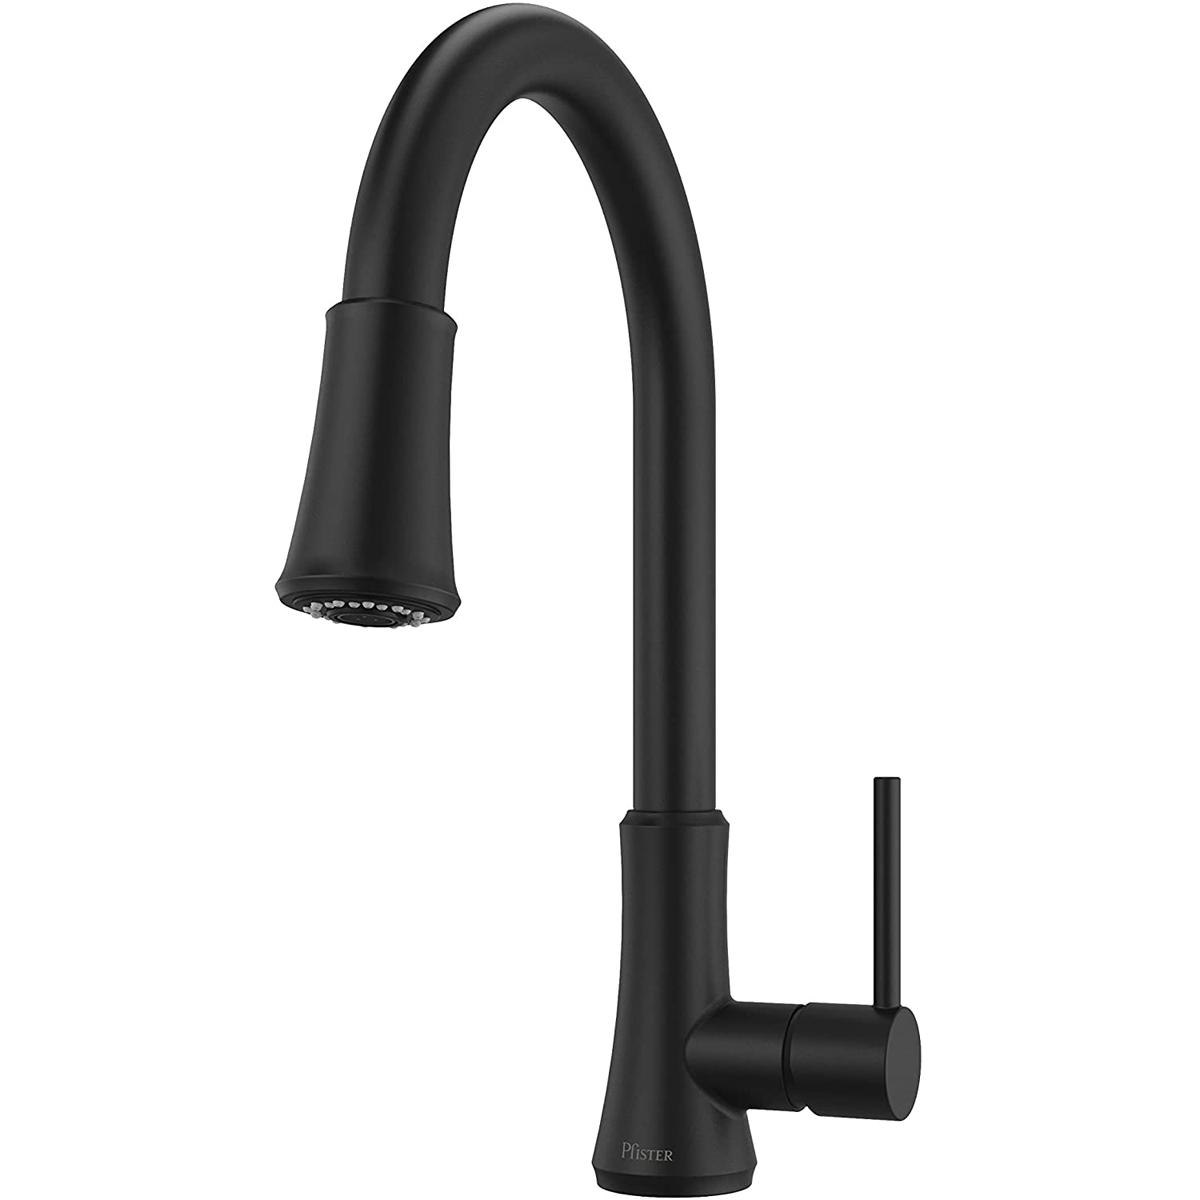 Pfister Pfirst Single Handle Pull Down Kitchen Faucet for $84.06 Shipped